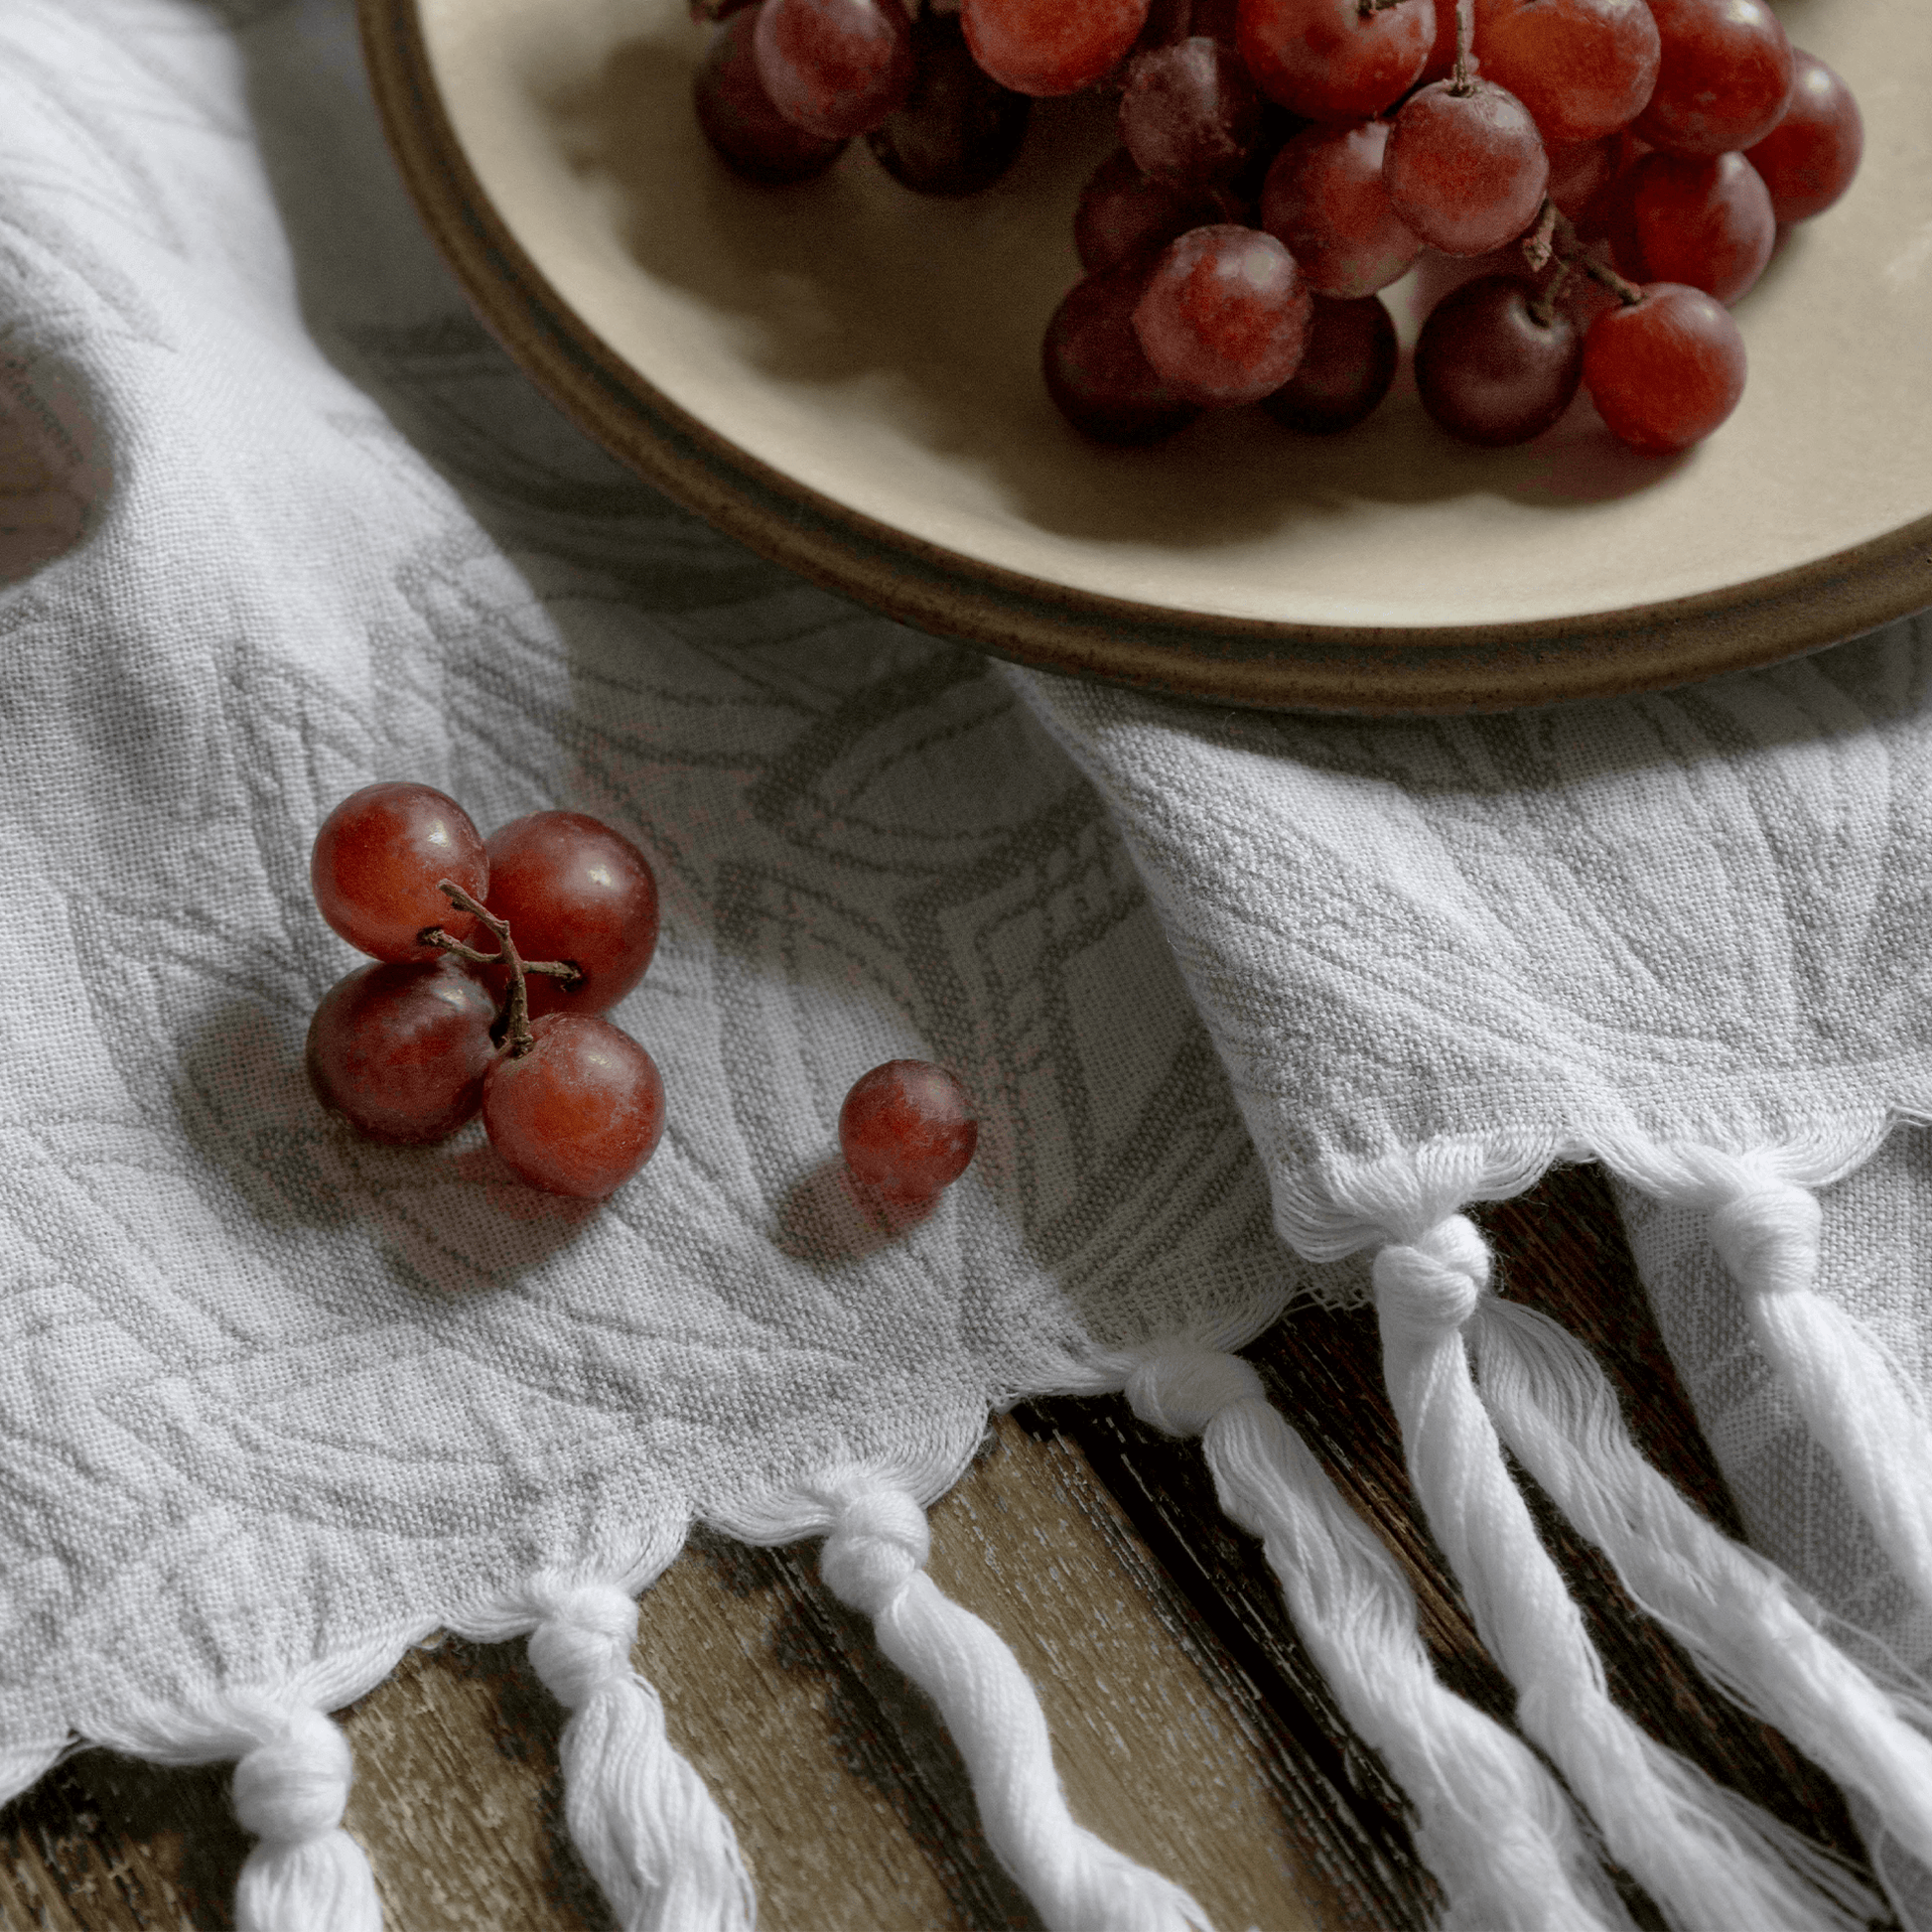 Grey and white Turkish hand towel with grapes in the kitchen